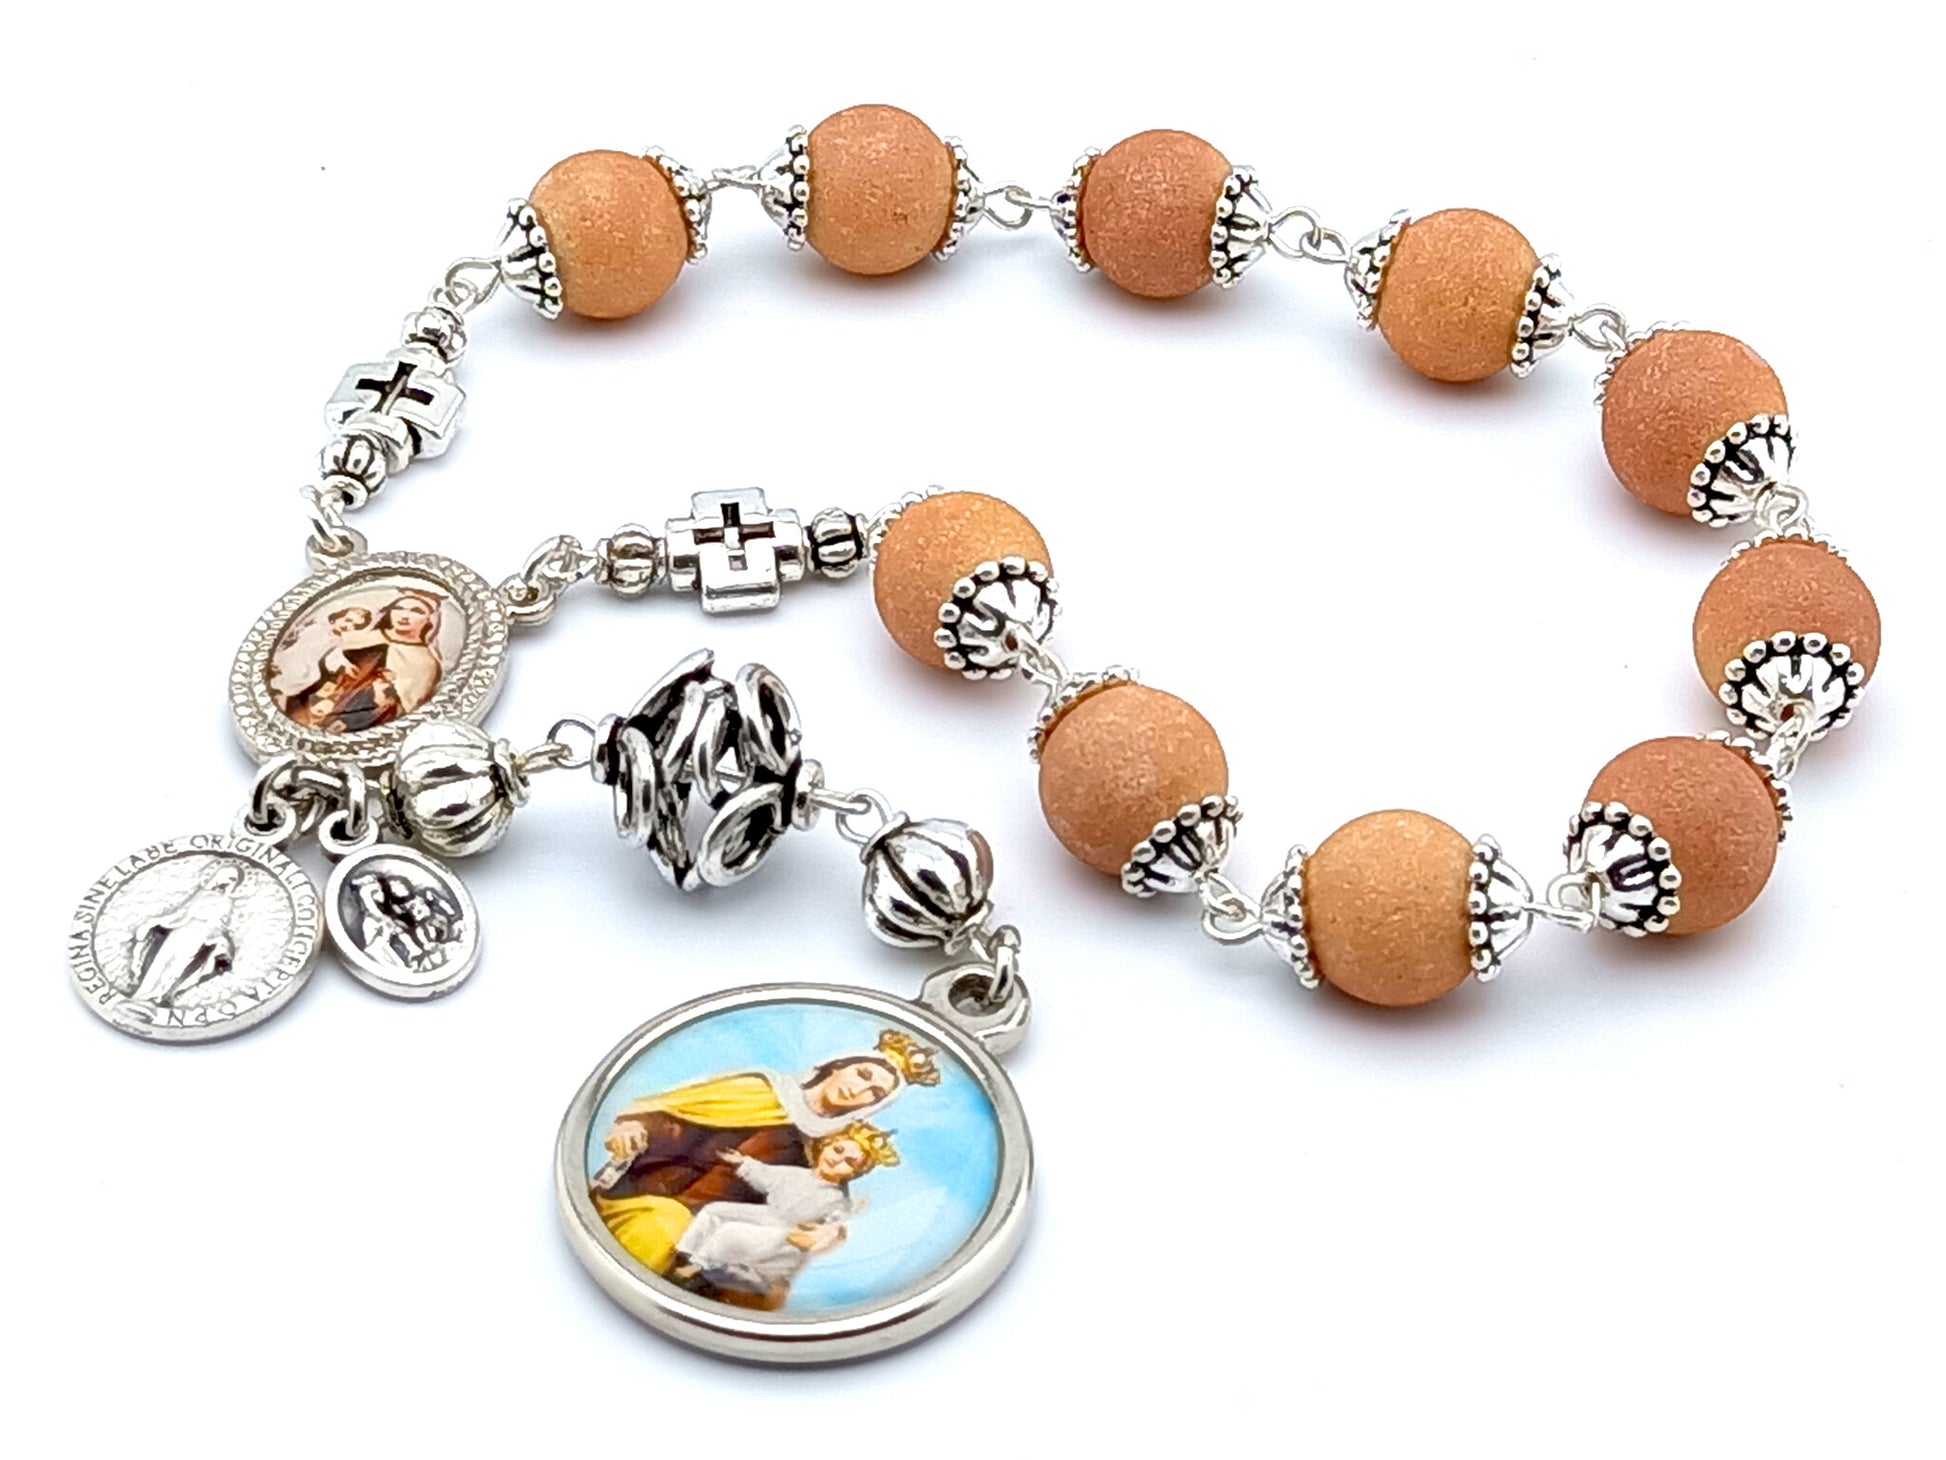 Our Lady of Mount Carmel unique rosary beads single decade rosary with buff glass and silver lattice beads, silver picture centre and end medals.